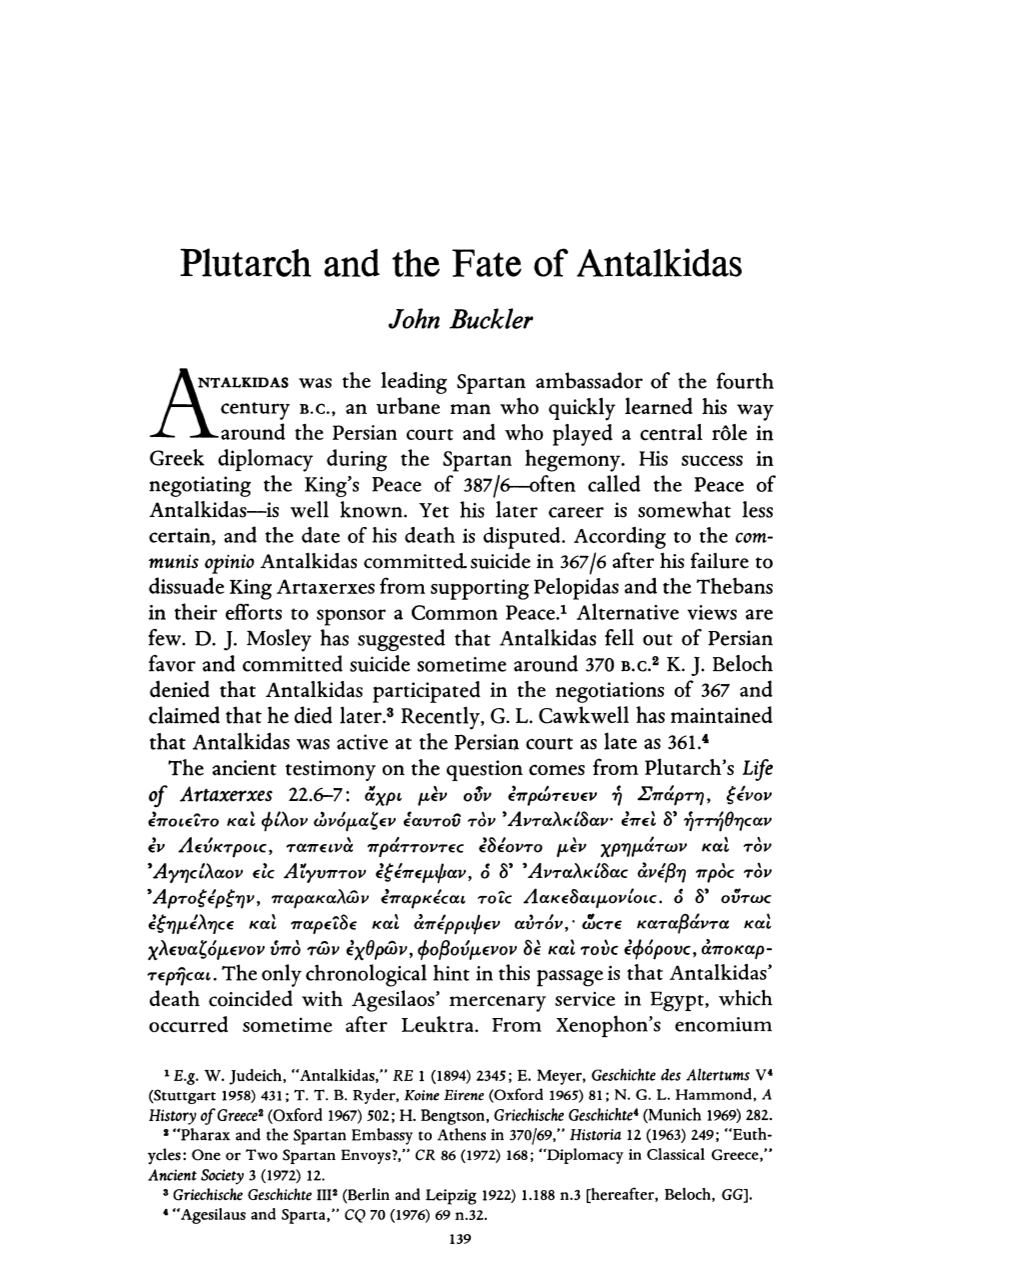 Plutarch and the Fate of Antalkidas Buckler, John Greek, Roman and Byzantine Studies; Summer 1977; 18, 2; Periodicals Archive Online Pg